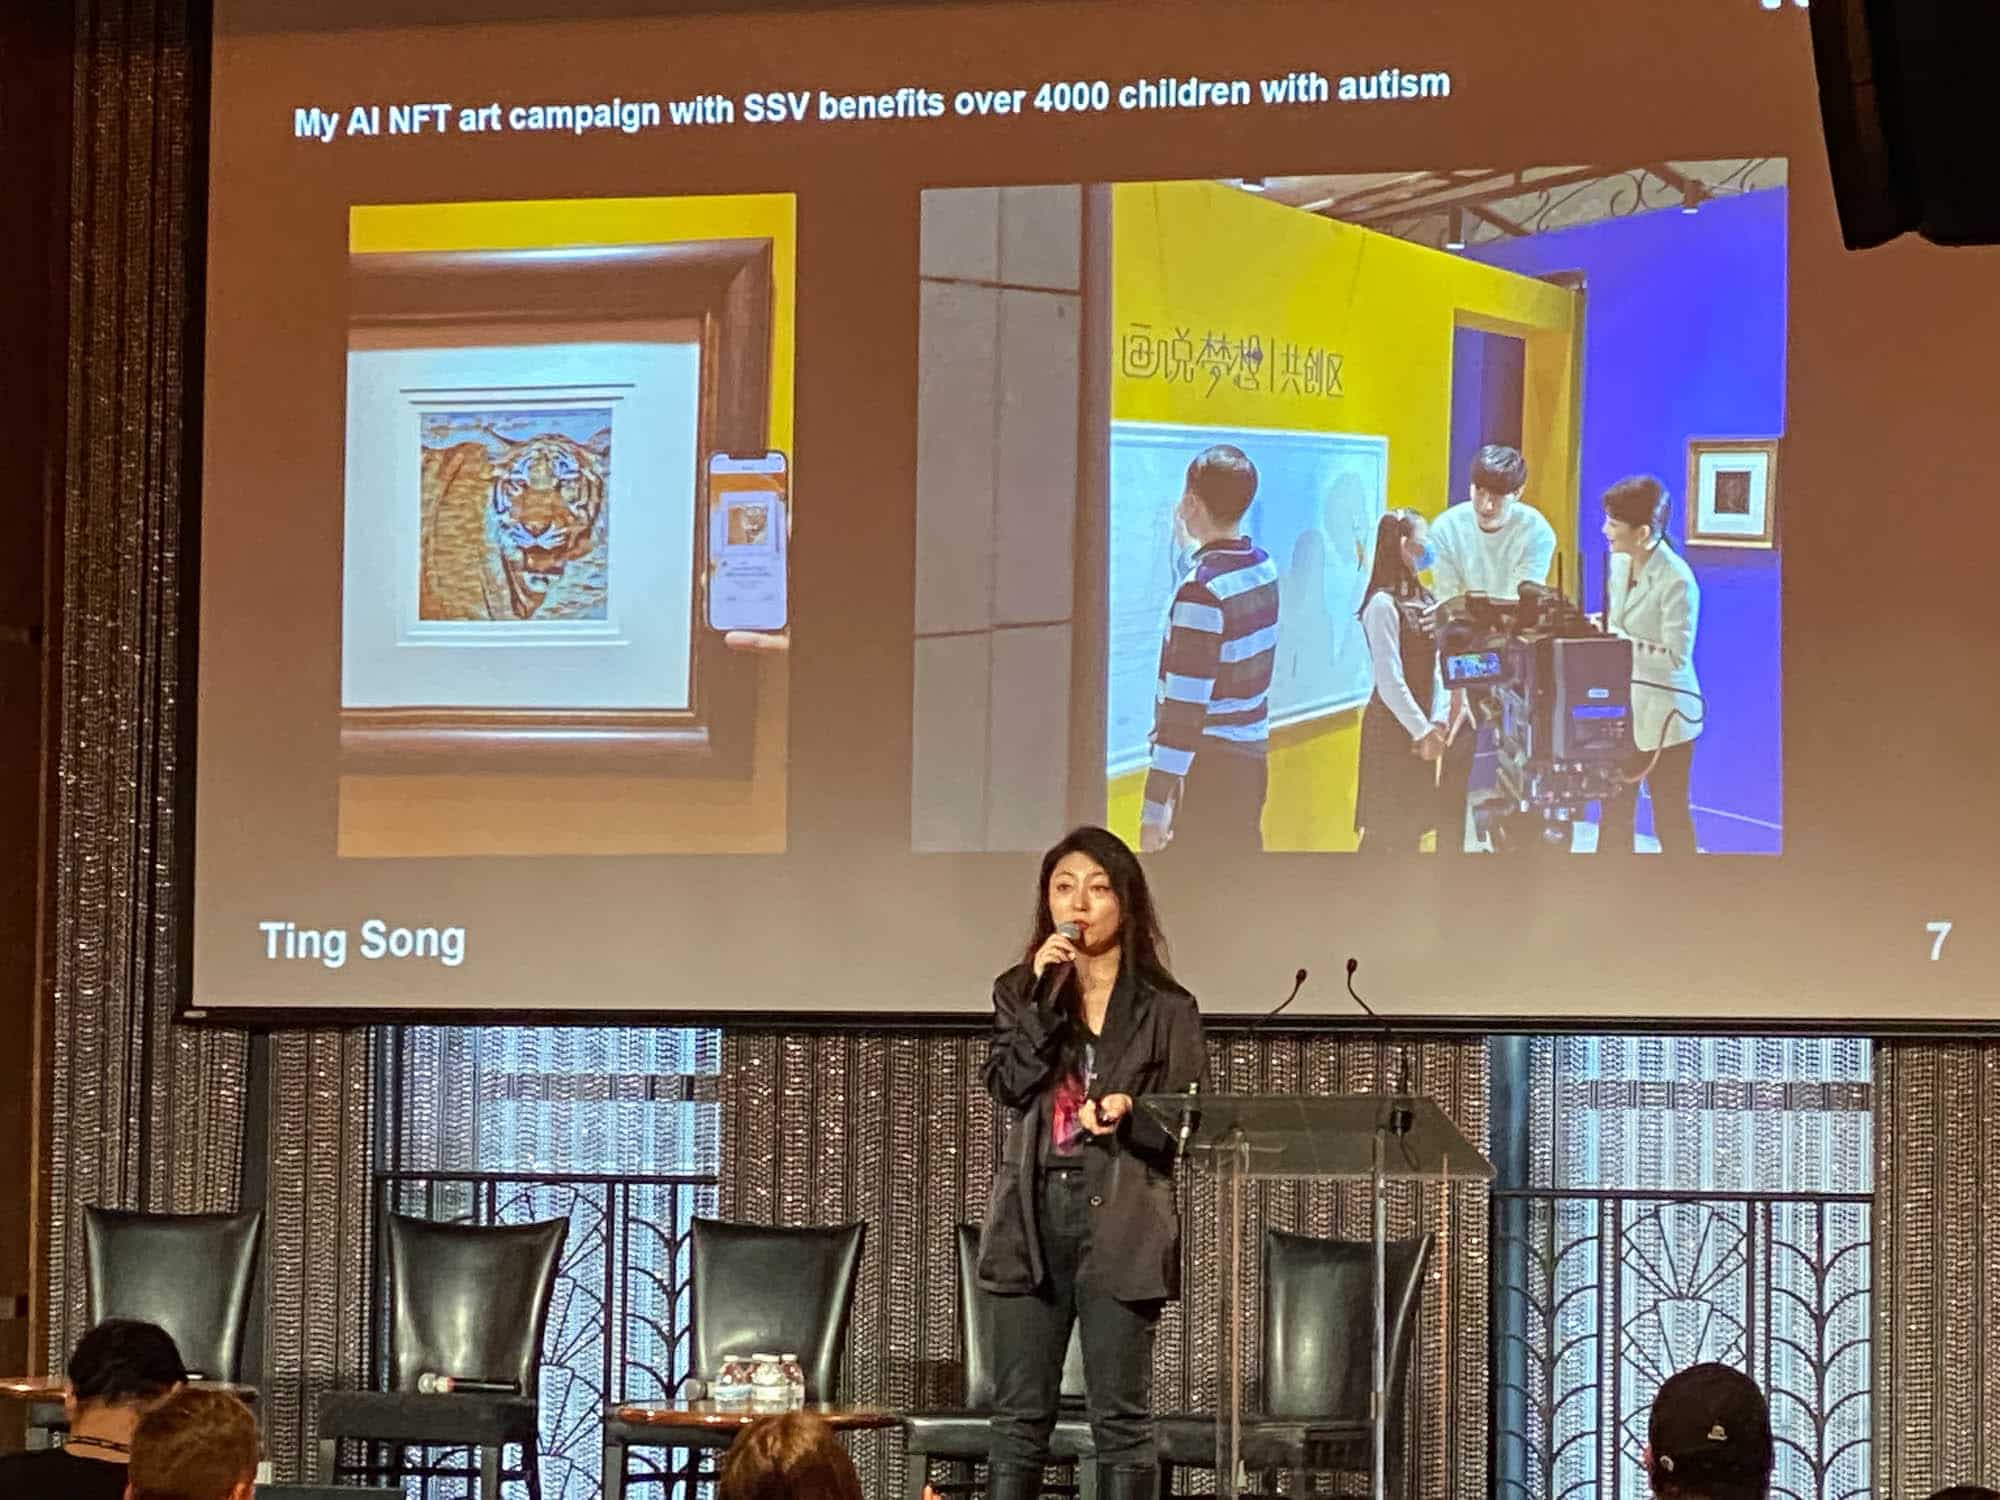 Ting Song on her AI NFT art campaign benefiting children with autism